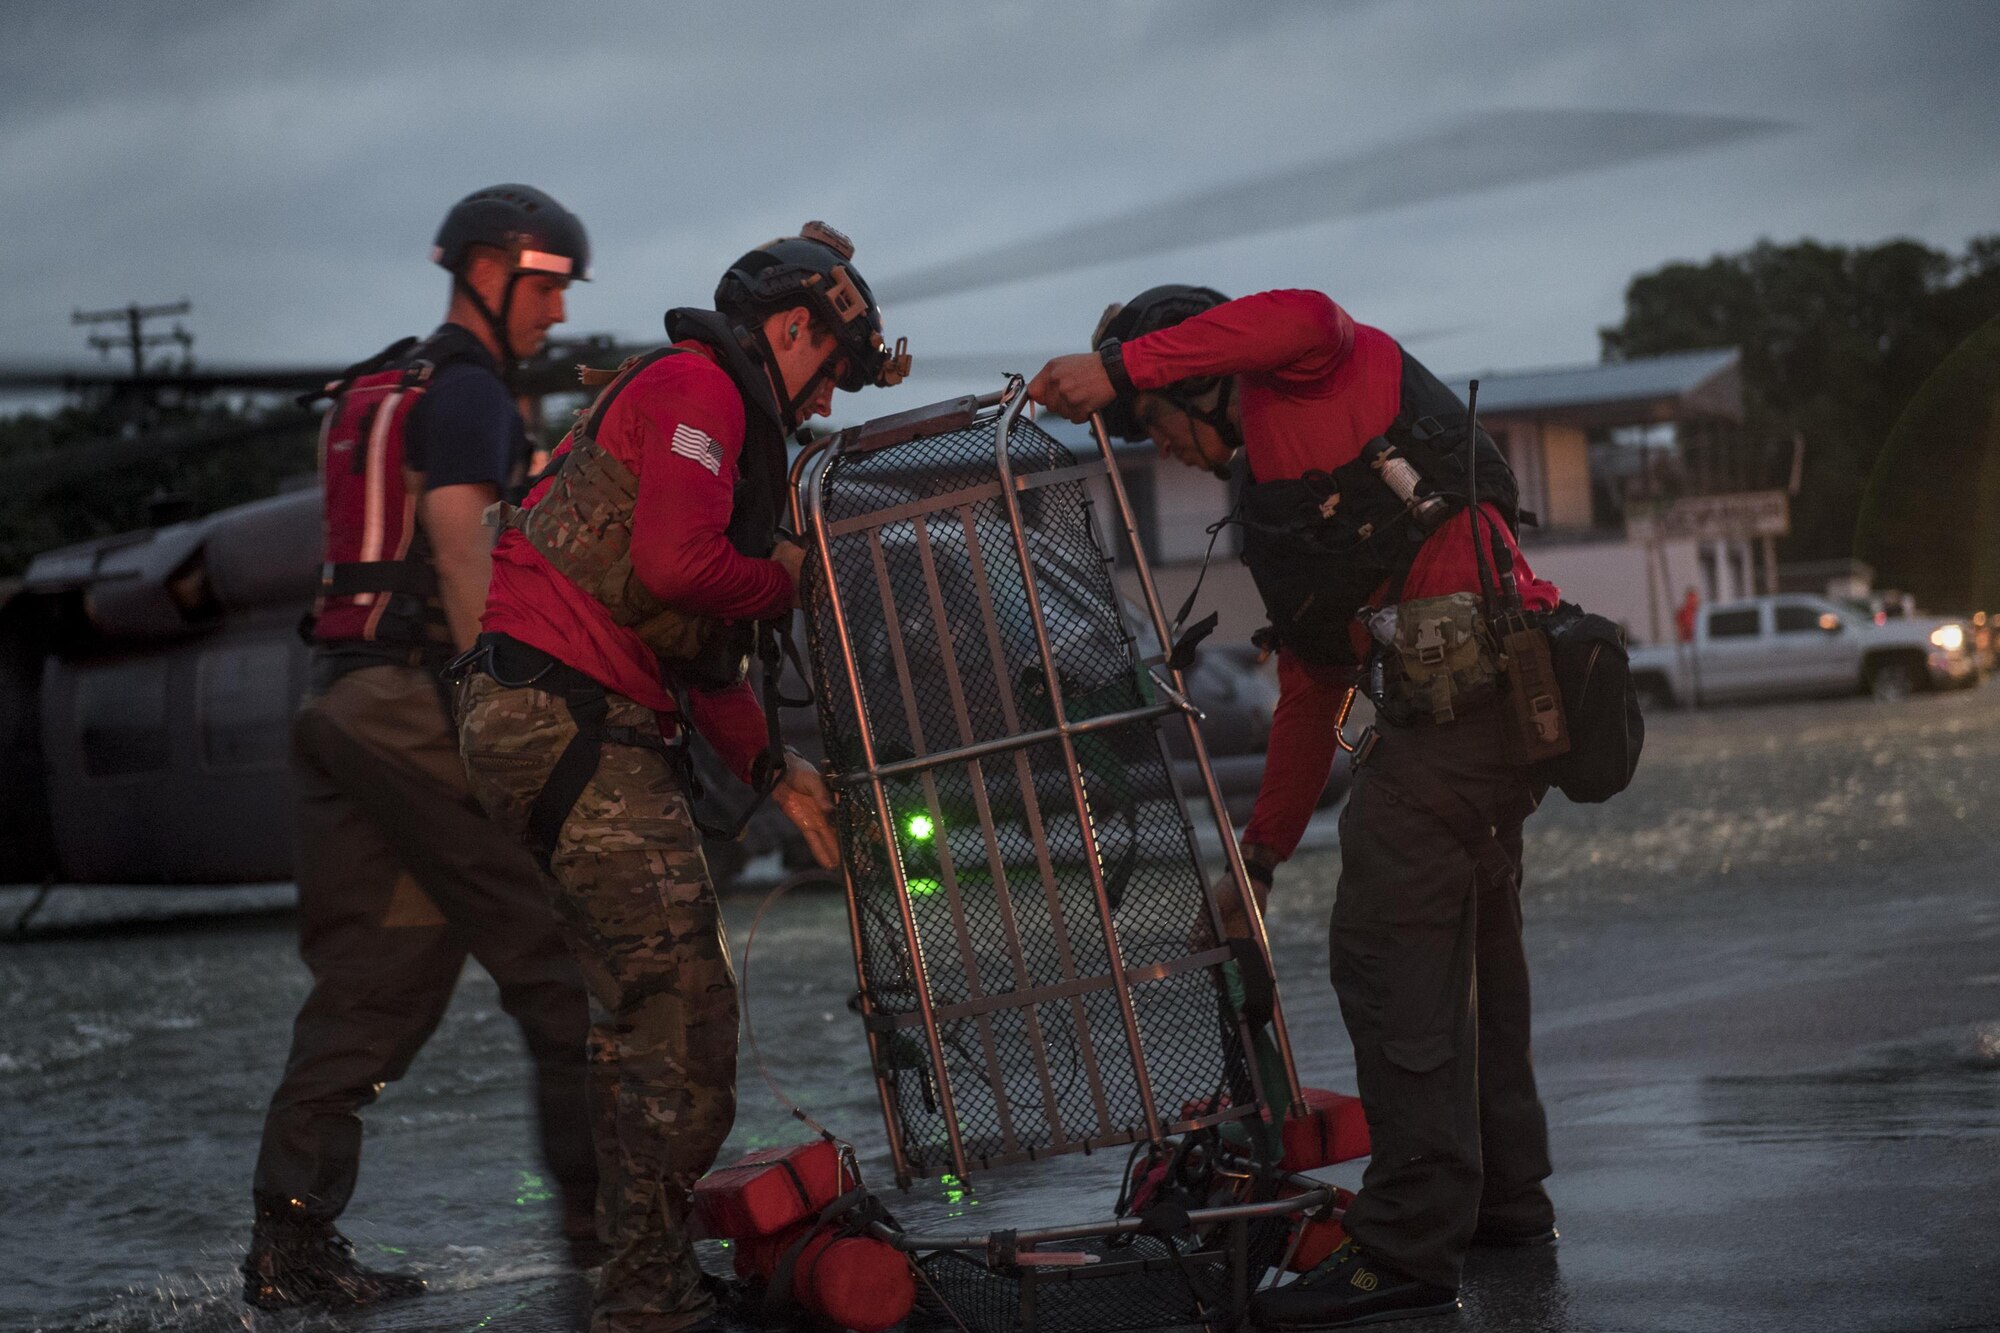 Pararescuemen from the 38th Rescue Squadron set up a basket to carry an evacuee, Aug. 30, 2017, in the Houston, Texas area.